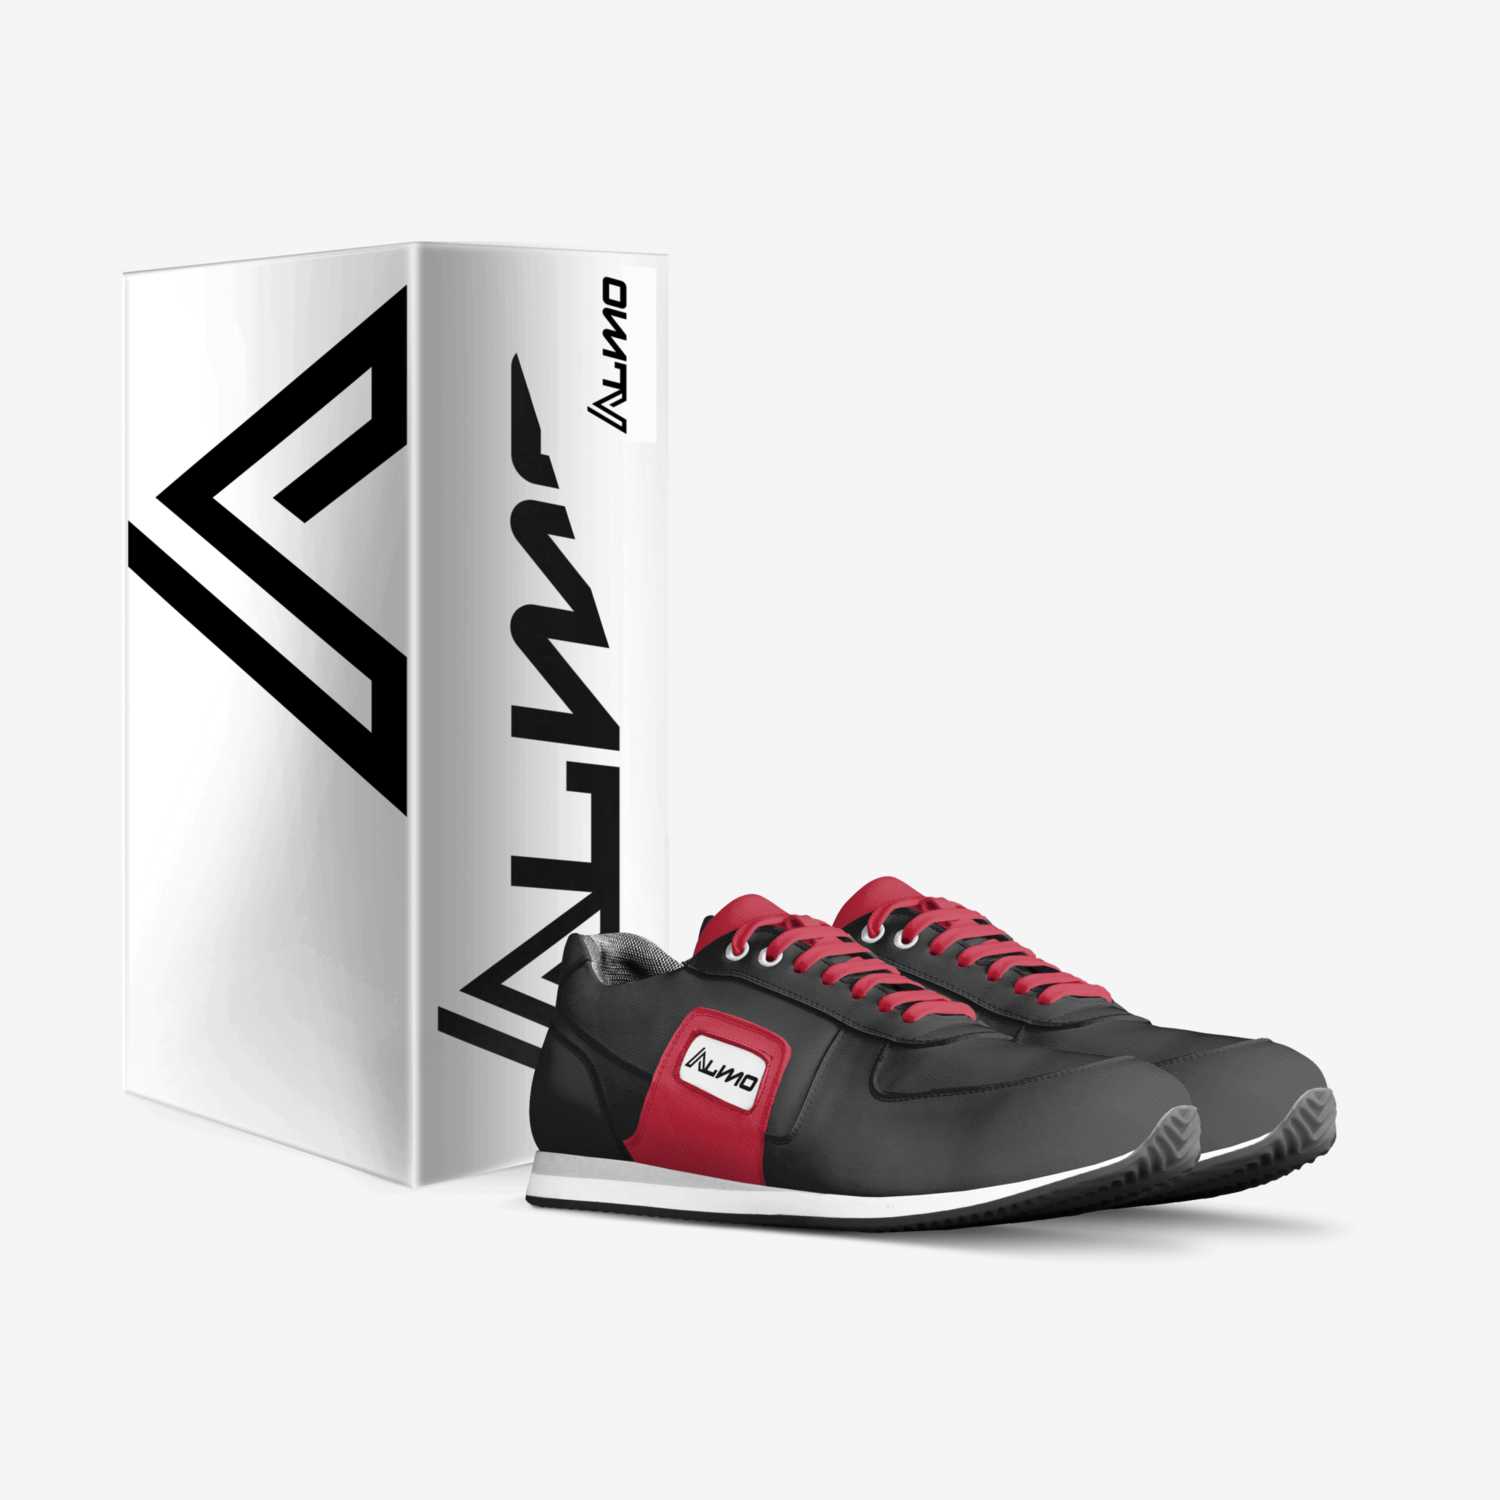 Revved custom made in Italy shoes by Almo Wear | Box view